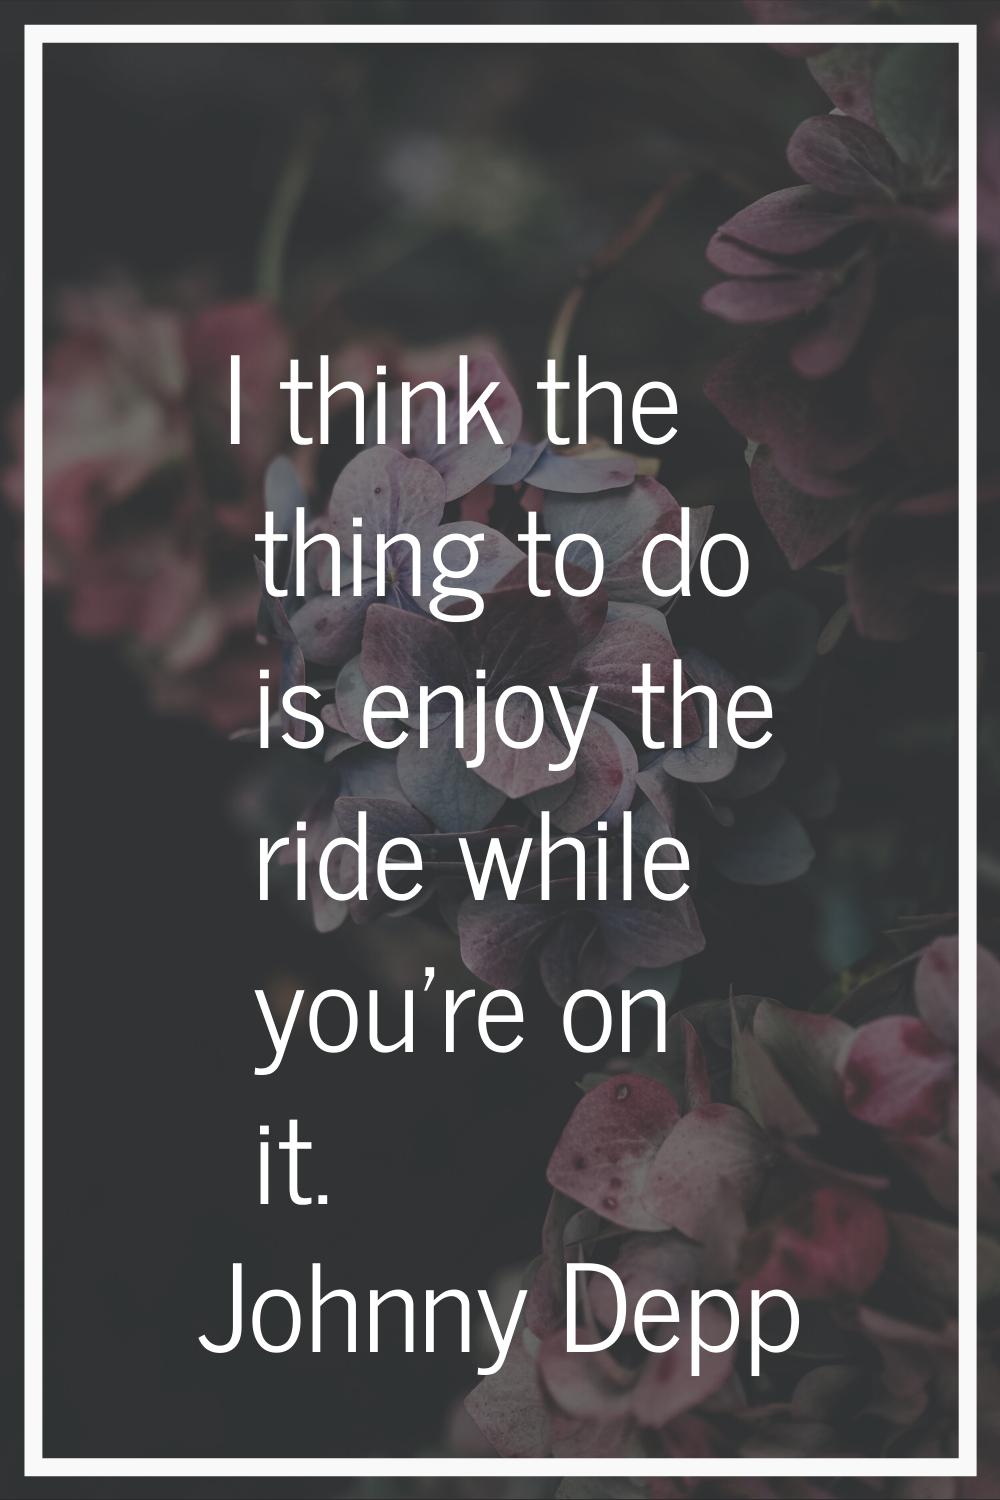 I think the thing to do is enjoy the ride while you're on it.